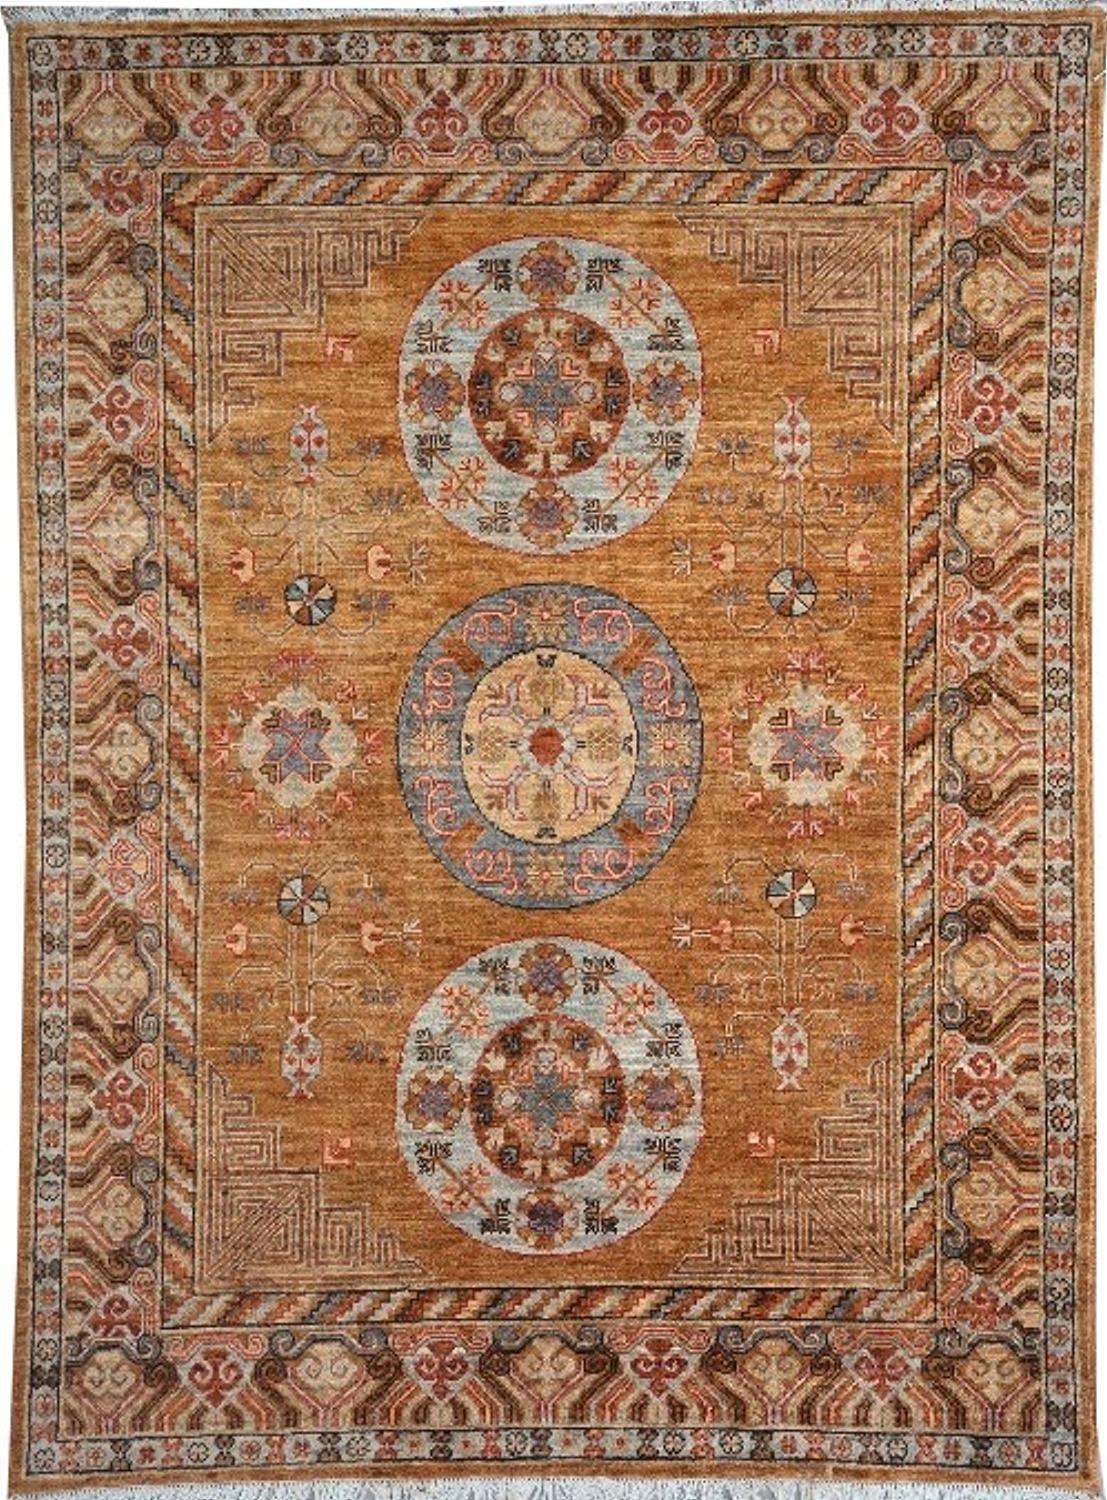 Khotan Style Rug Hand Knotted Contemporary Camel Colored Wool Area Carpet 1